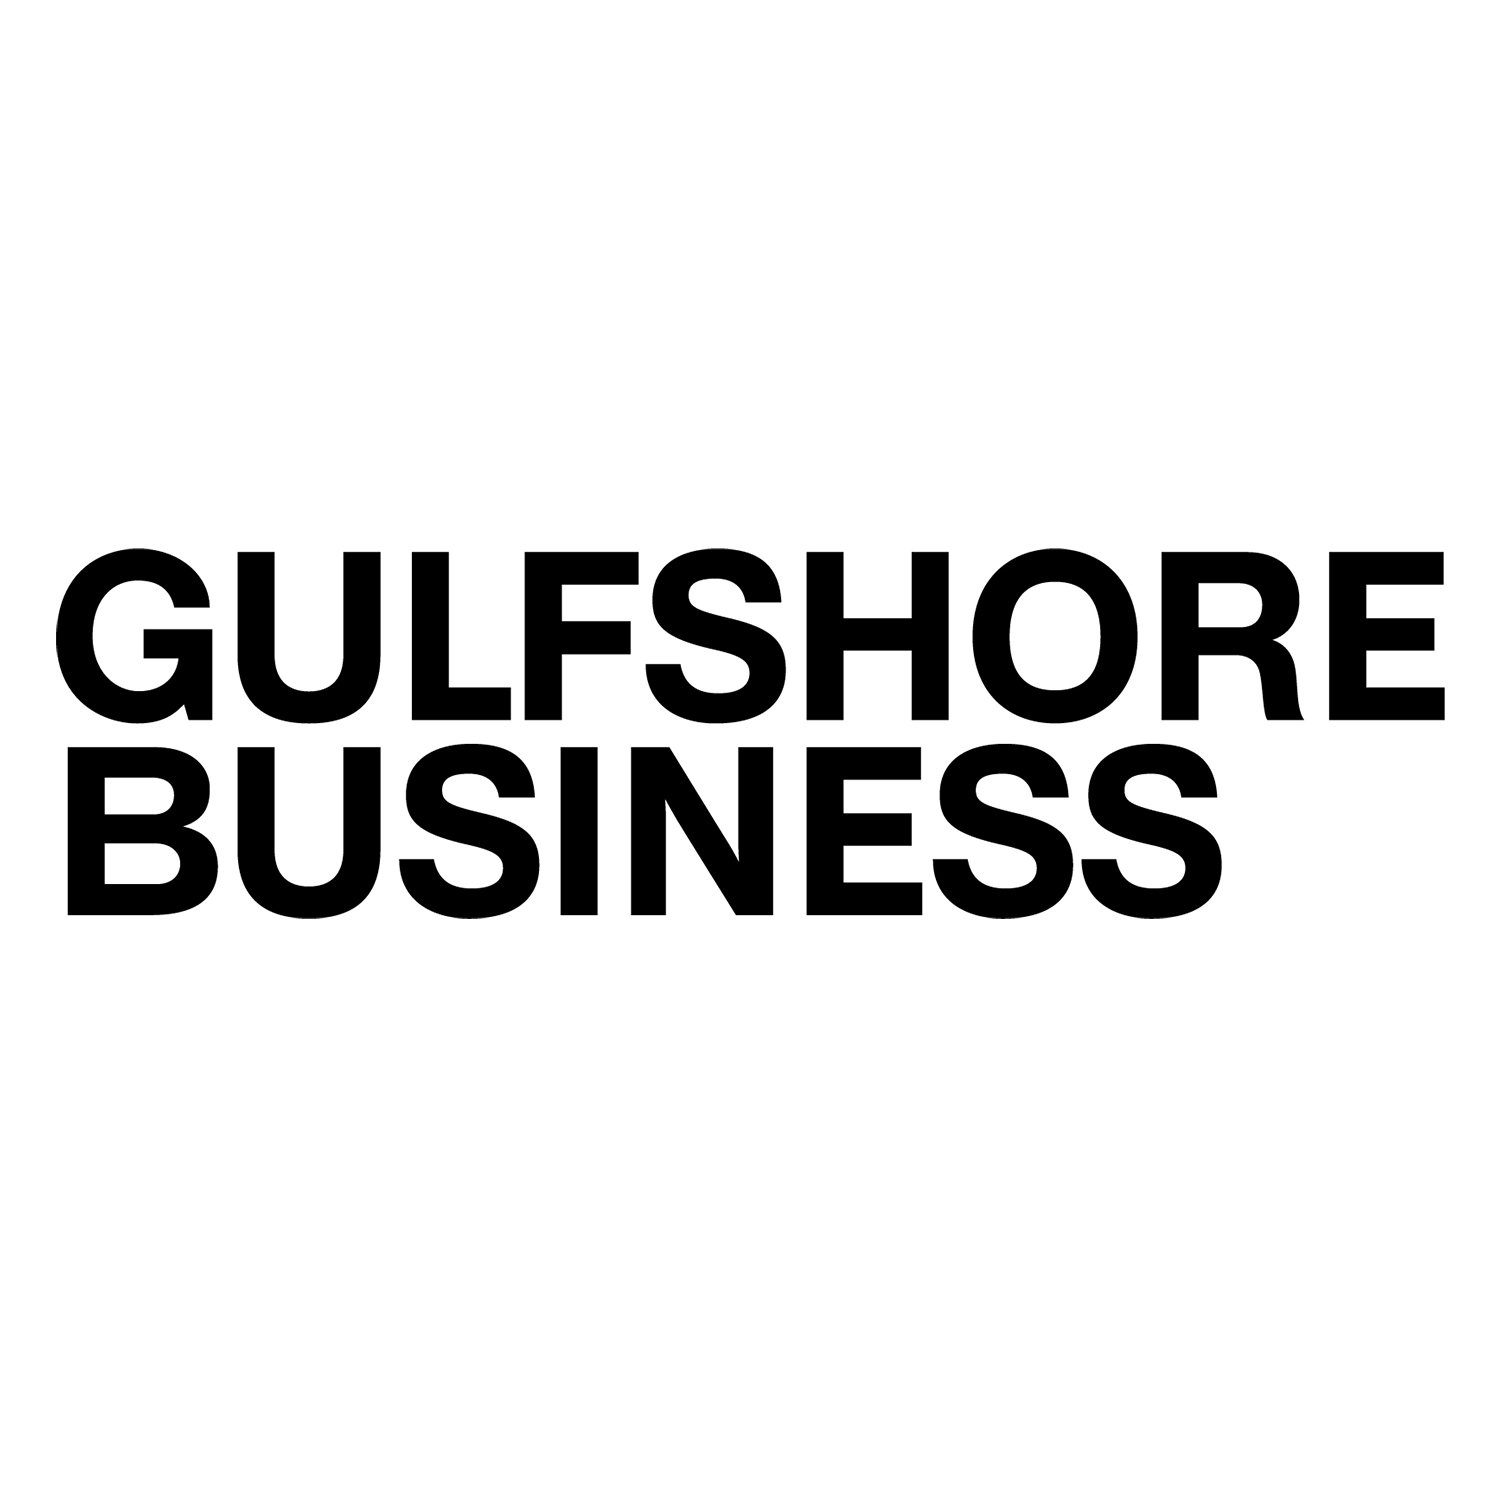 Collier Capital Club Offers Private Offices For Remote Workers | Gulfshore Business